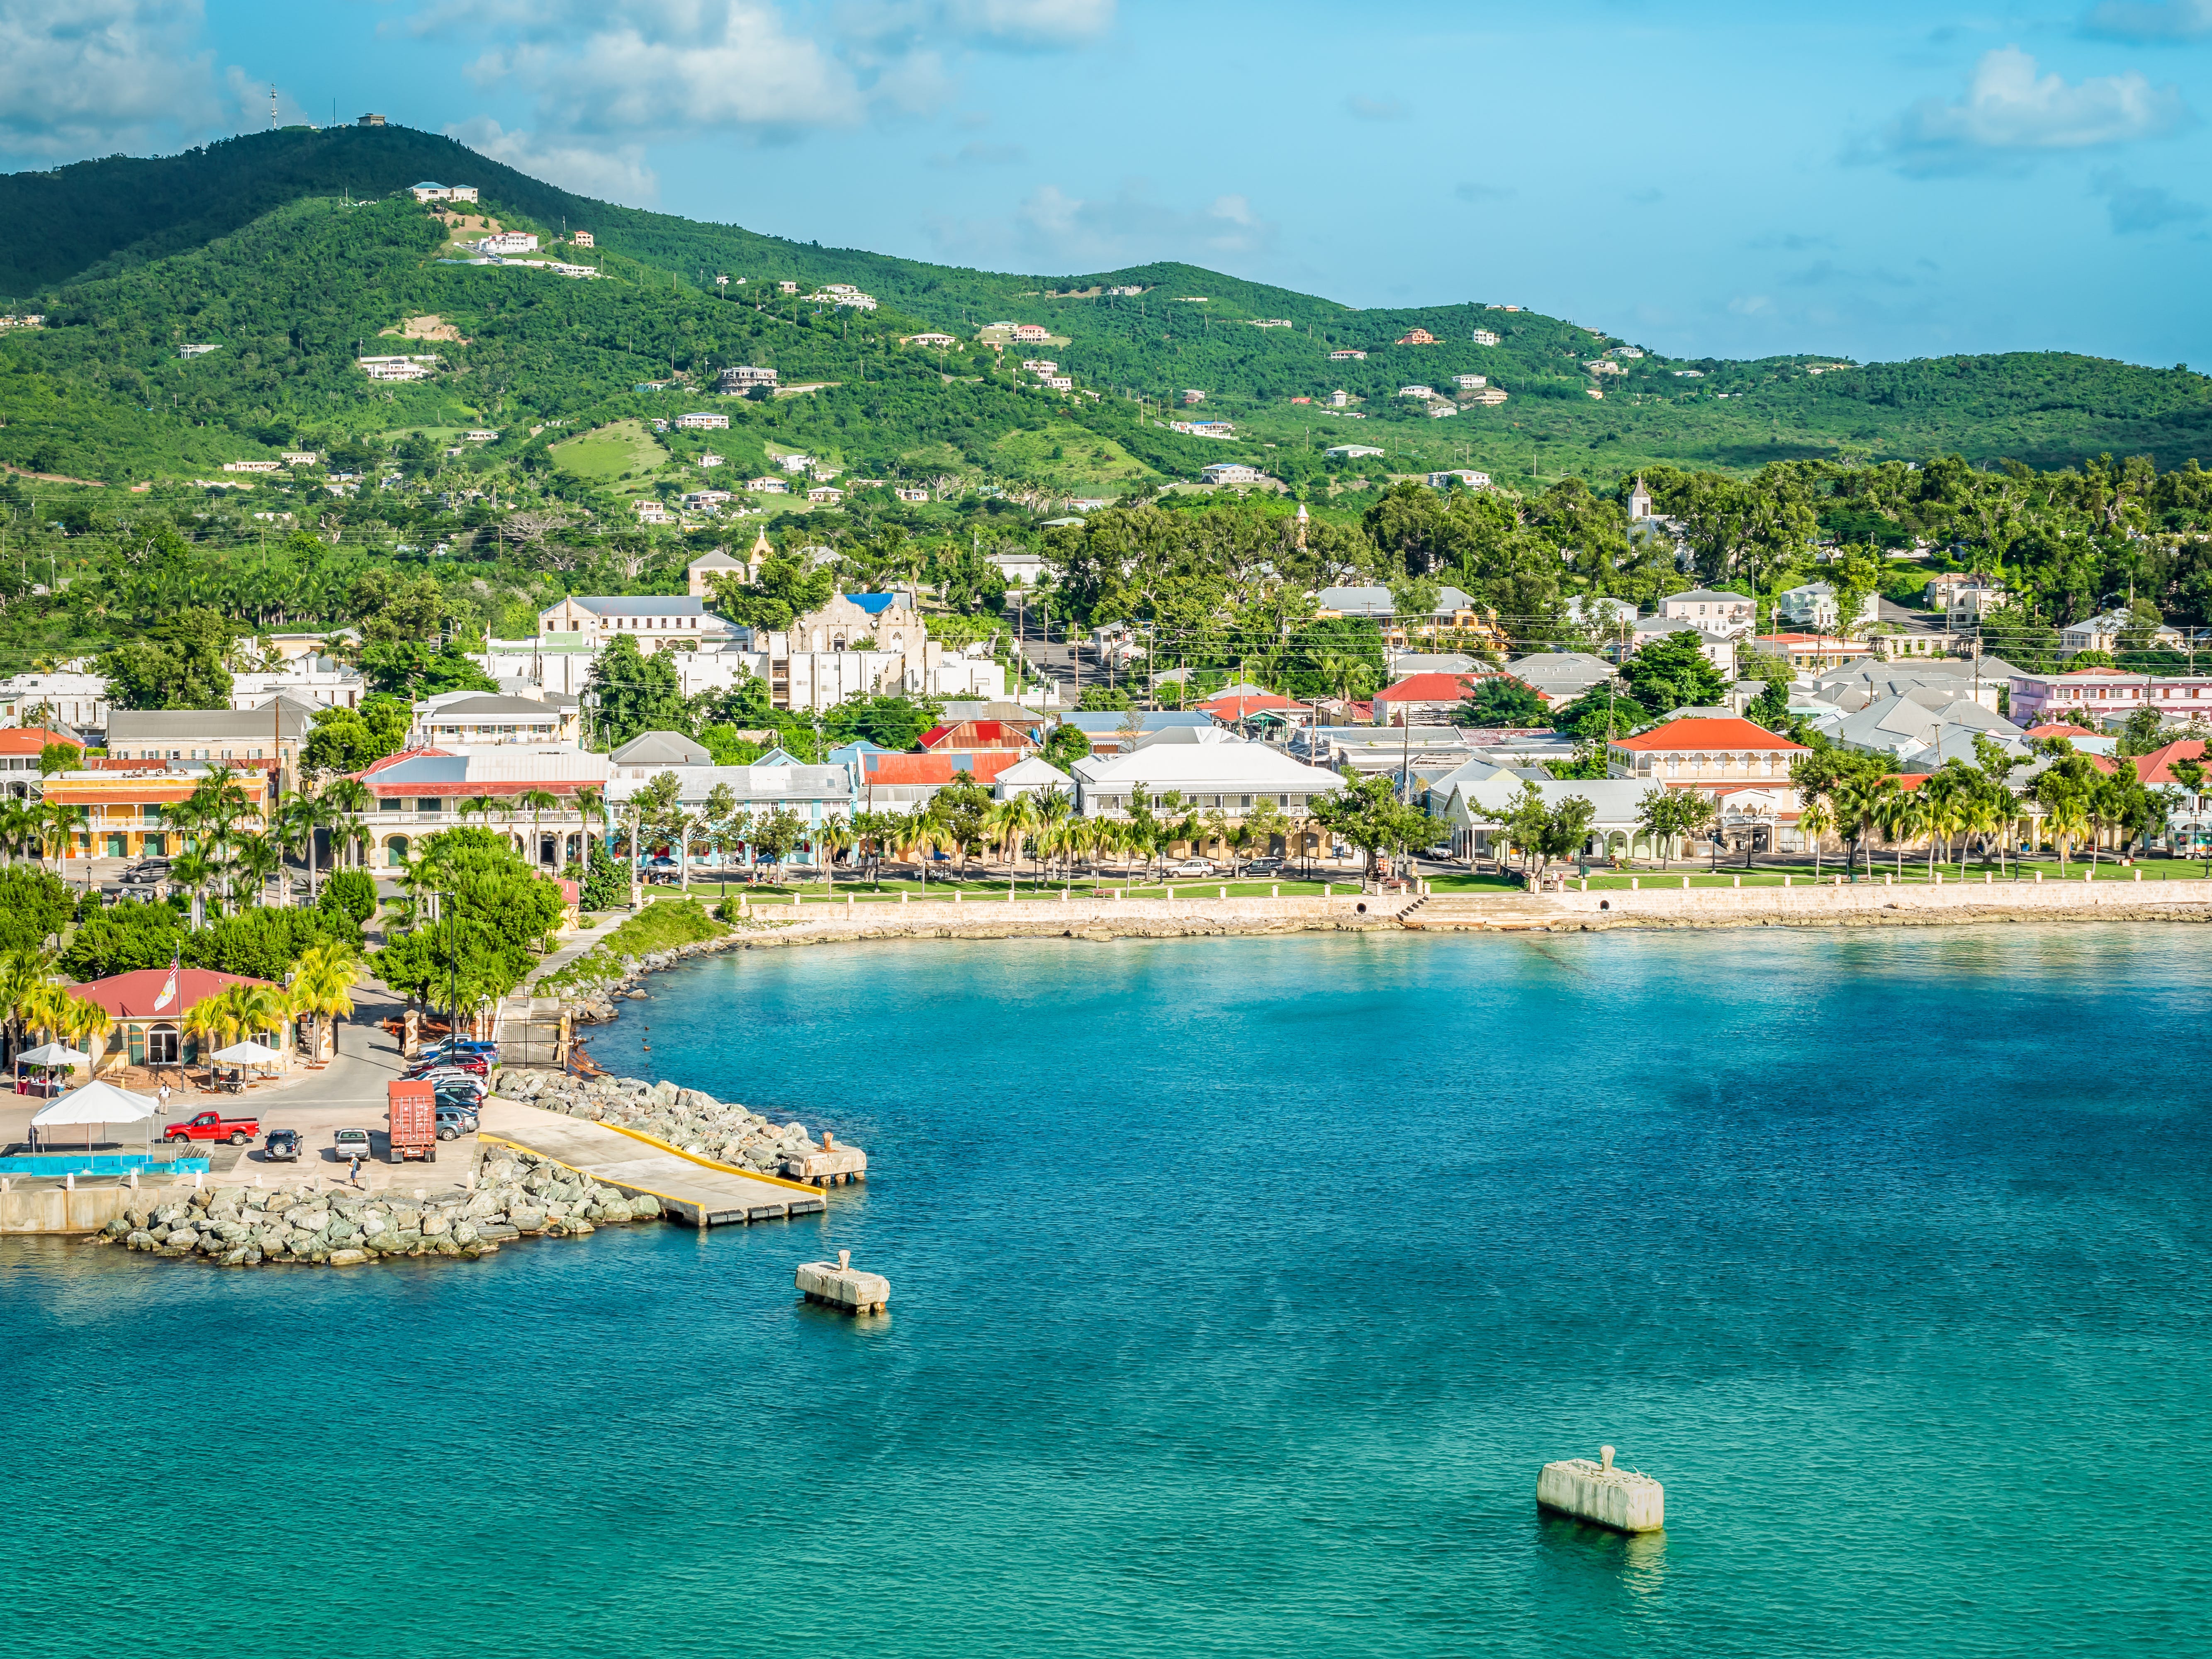 do you need a passport to the us virgin islands